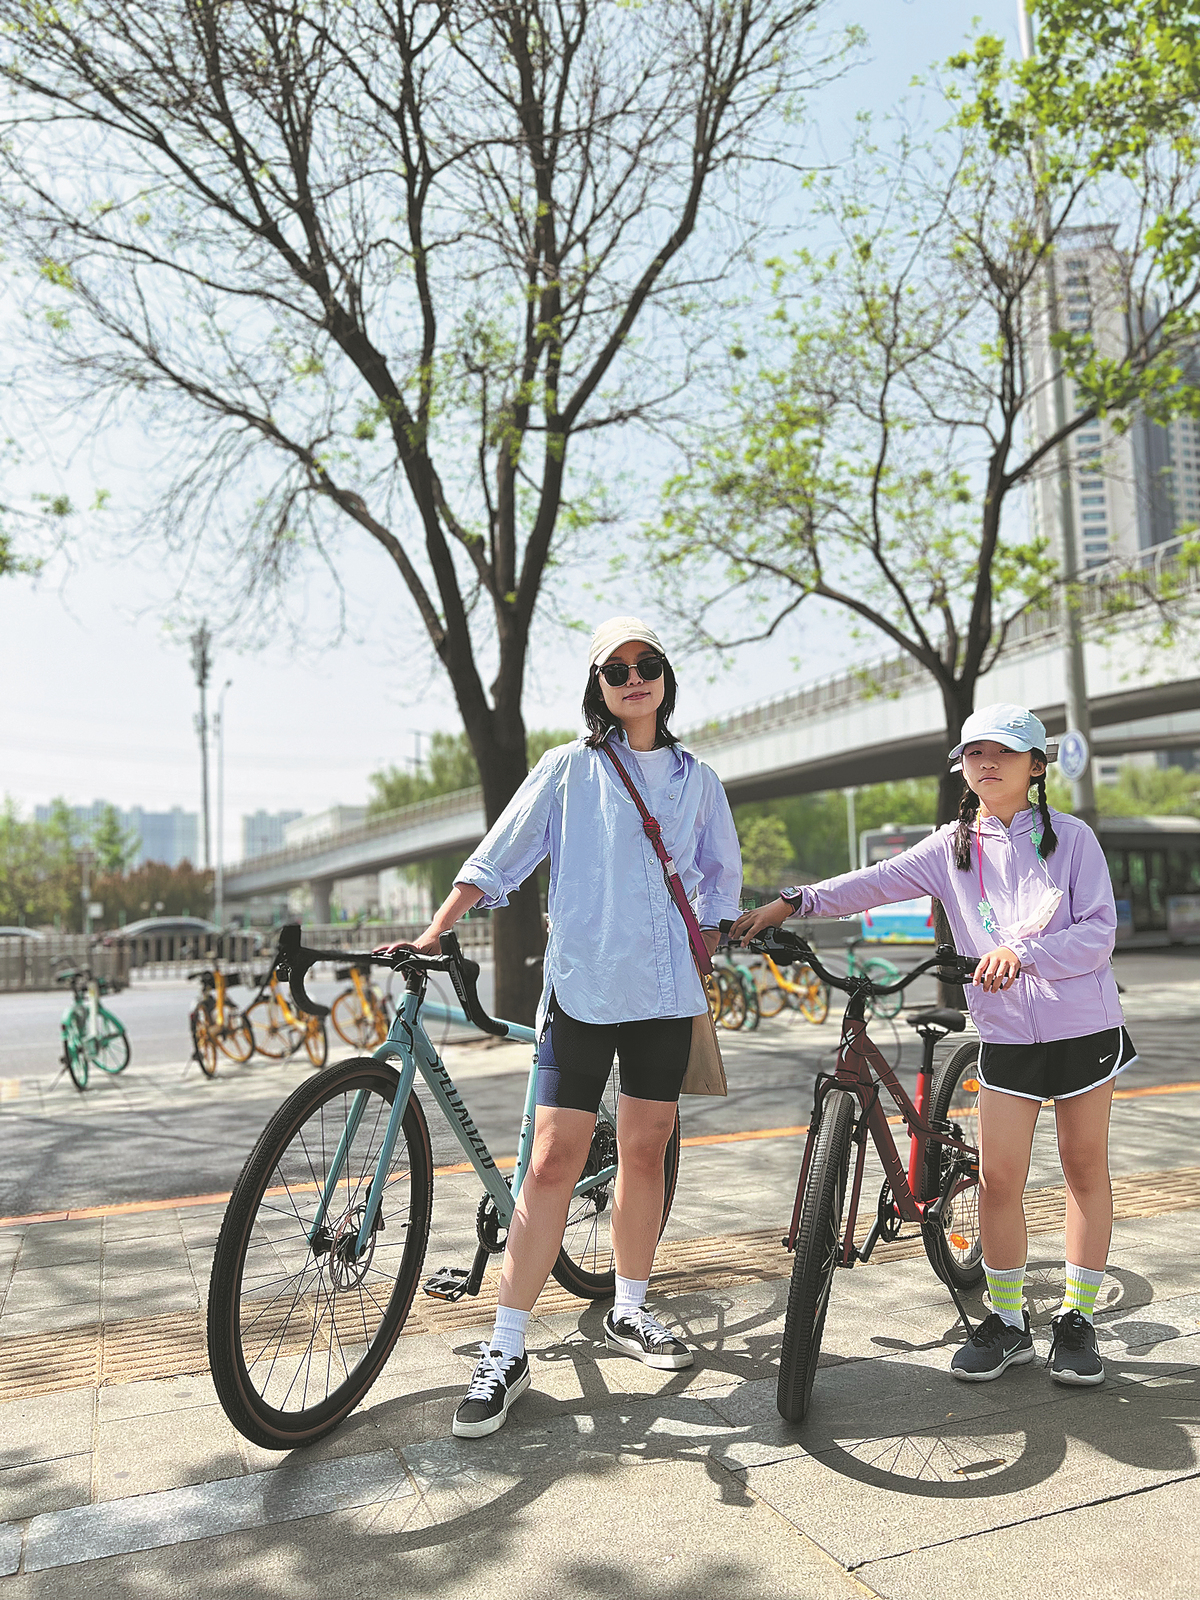 Beijing improves conditions for cyclists